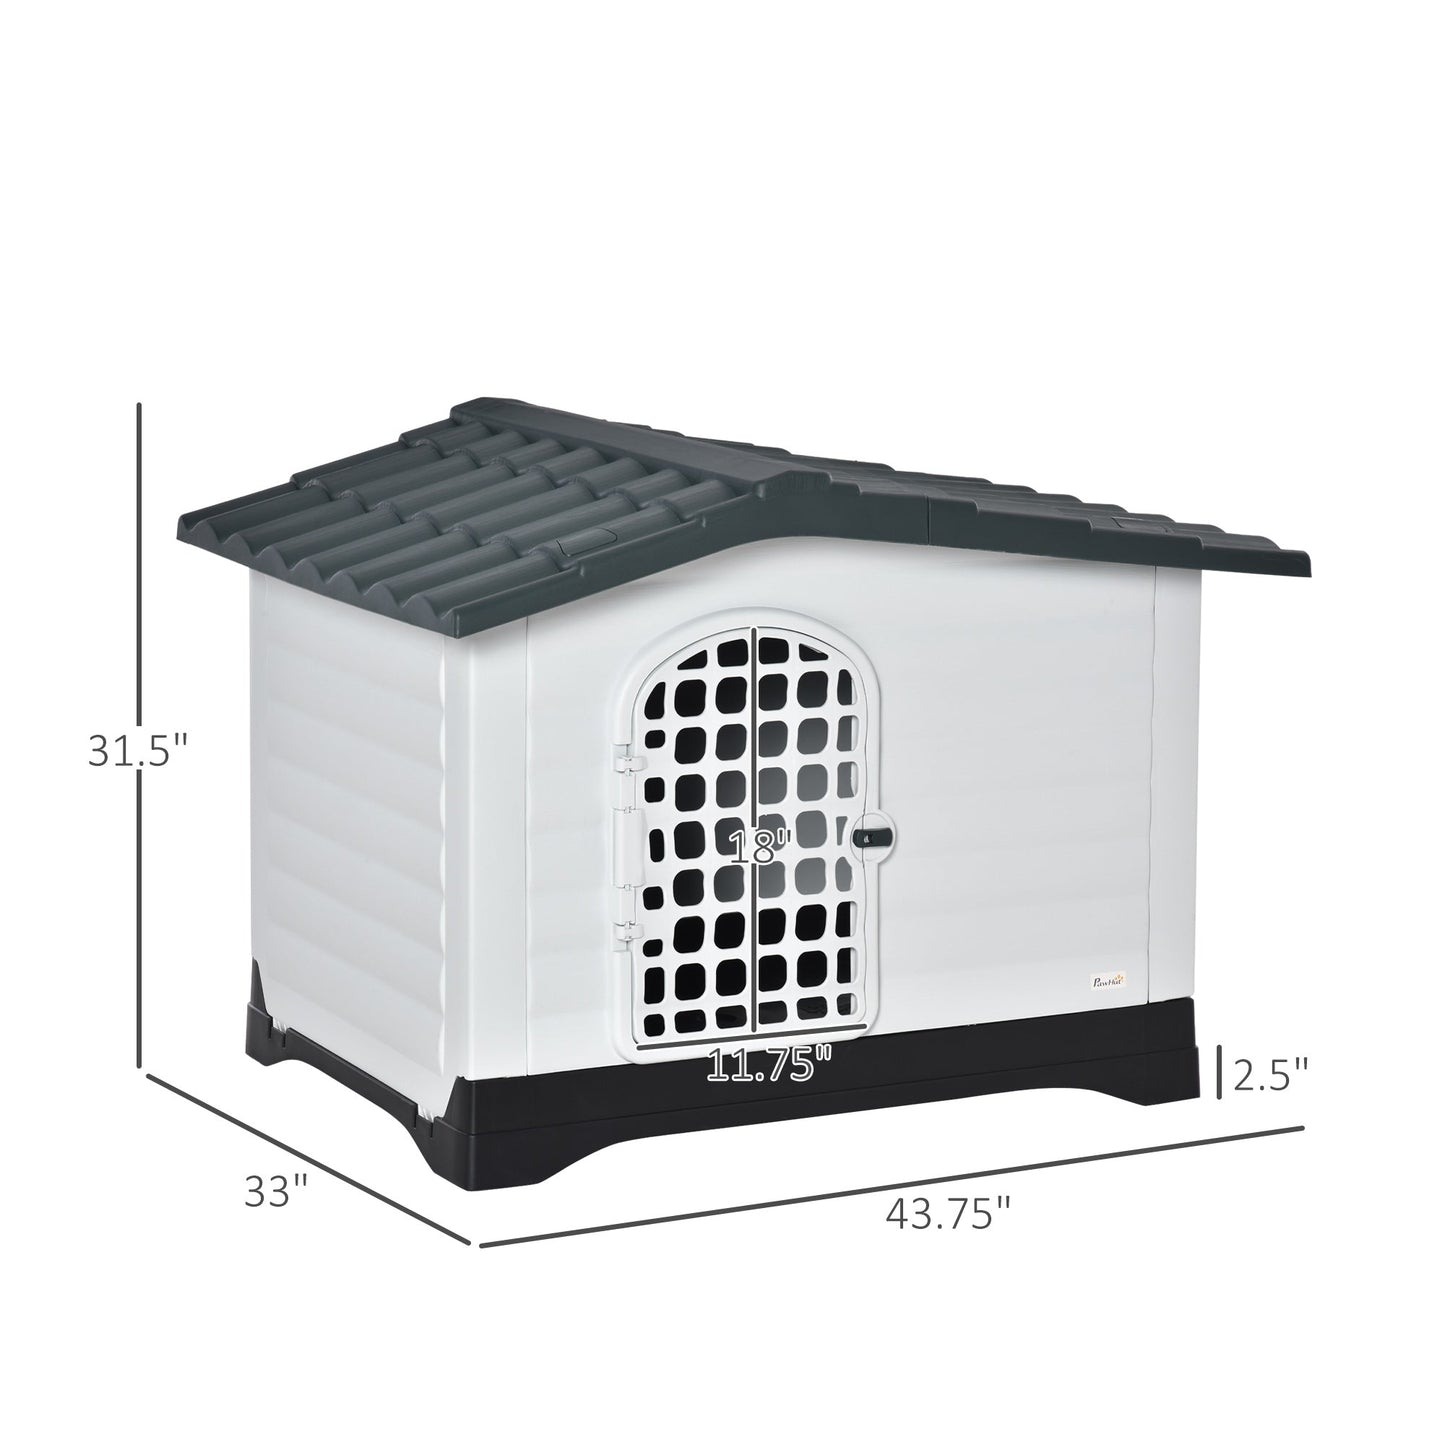 Plastic Dog Kennel House Puppy Indoor &; Outdoor Pet Shelter with Raised Base Window Door for Medium Sized Dogs Grey and White at Gallery Canada